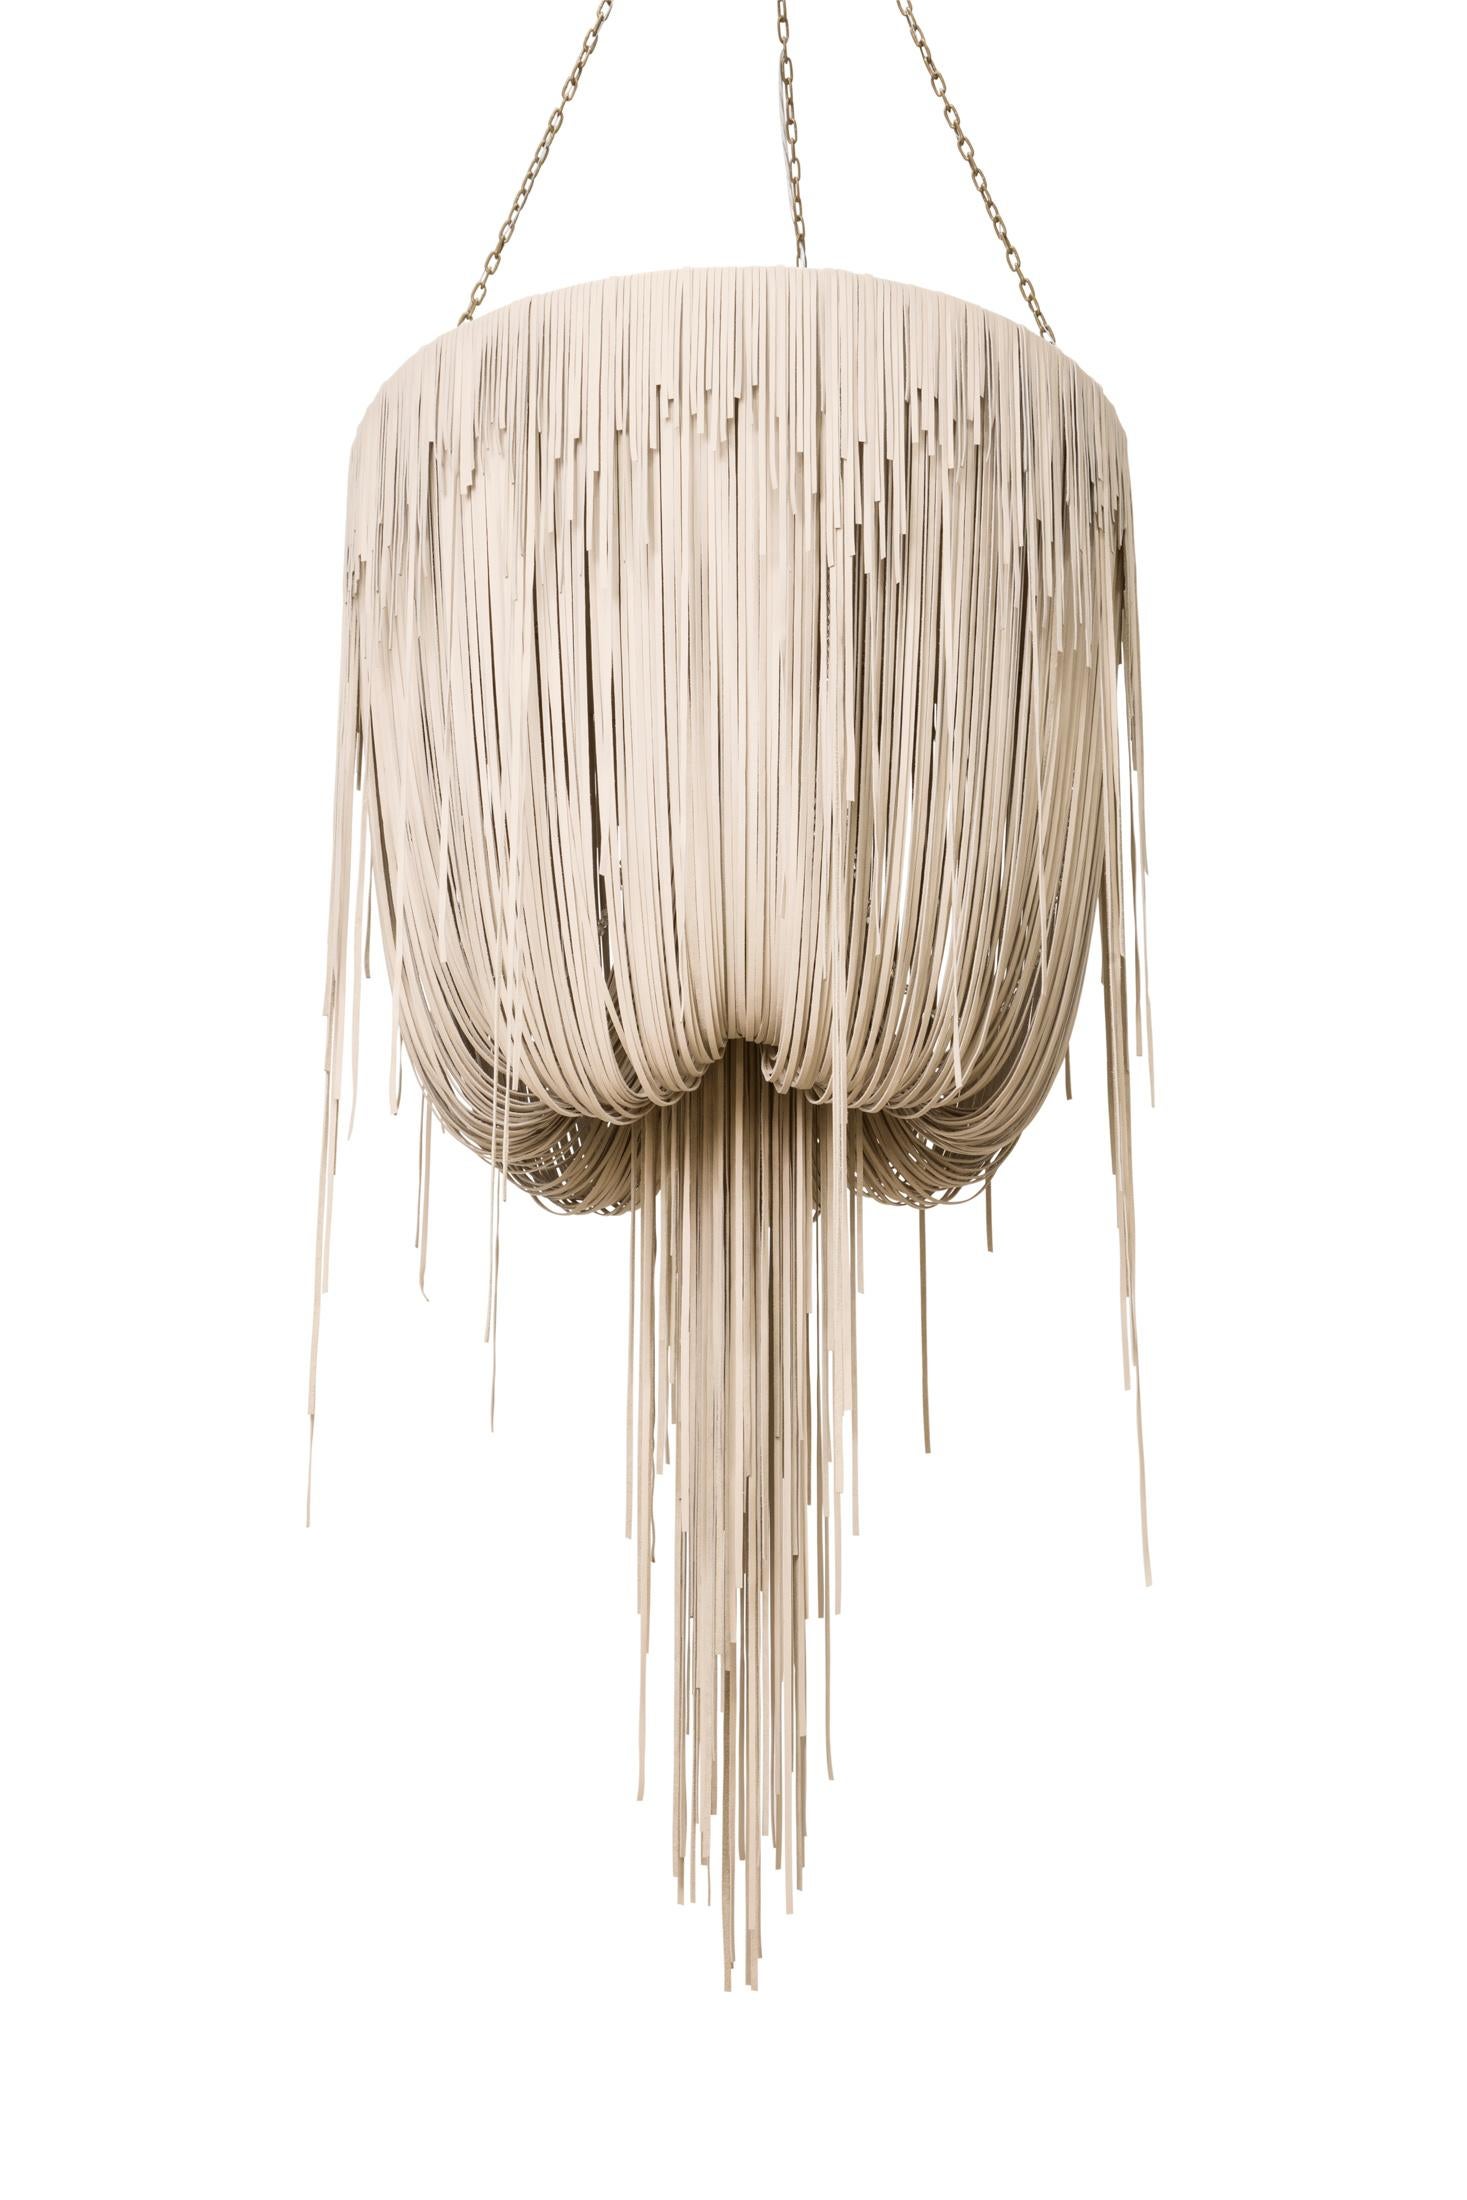 Urchin Leather Chandelier, Medium in Cream-Stone Leather For Sale 4